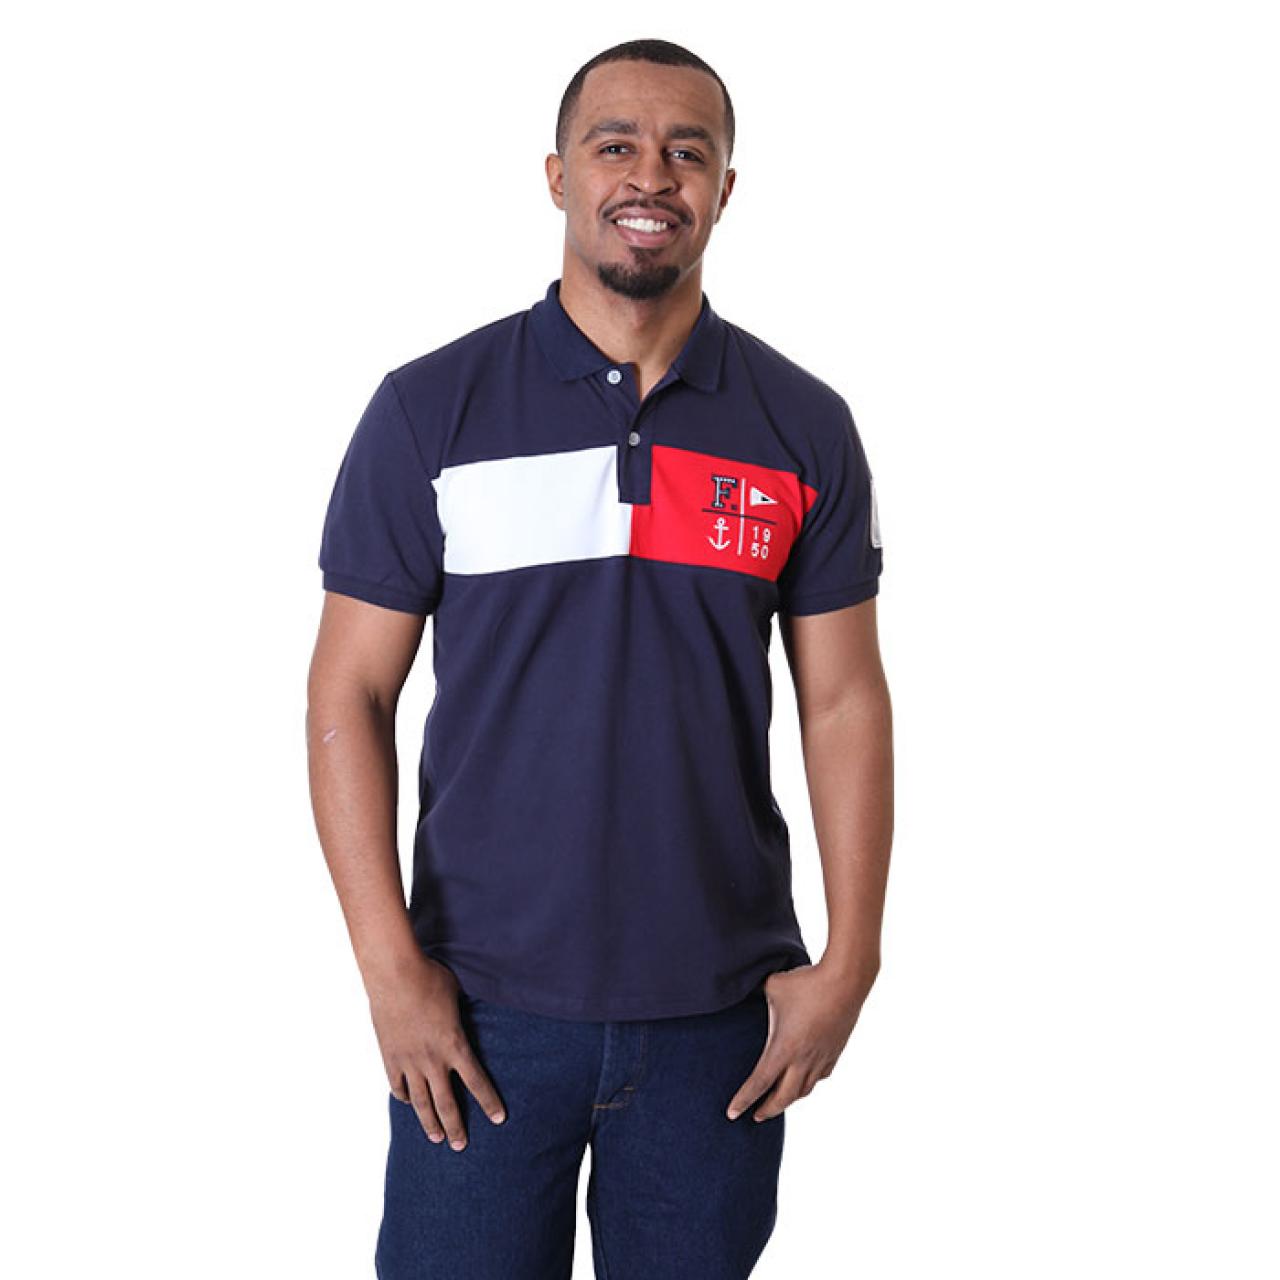 Men's Navy Blue Collared Neck Tees With Designer Patch At Chest